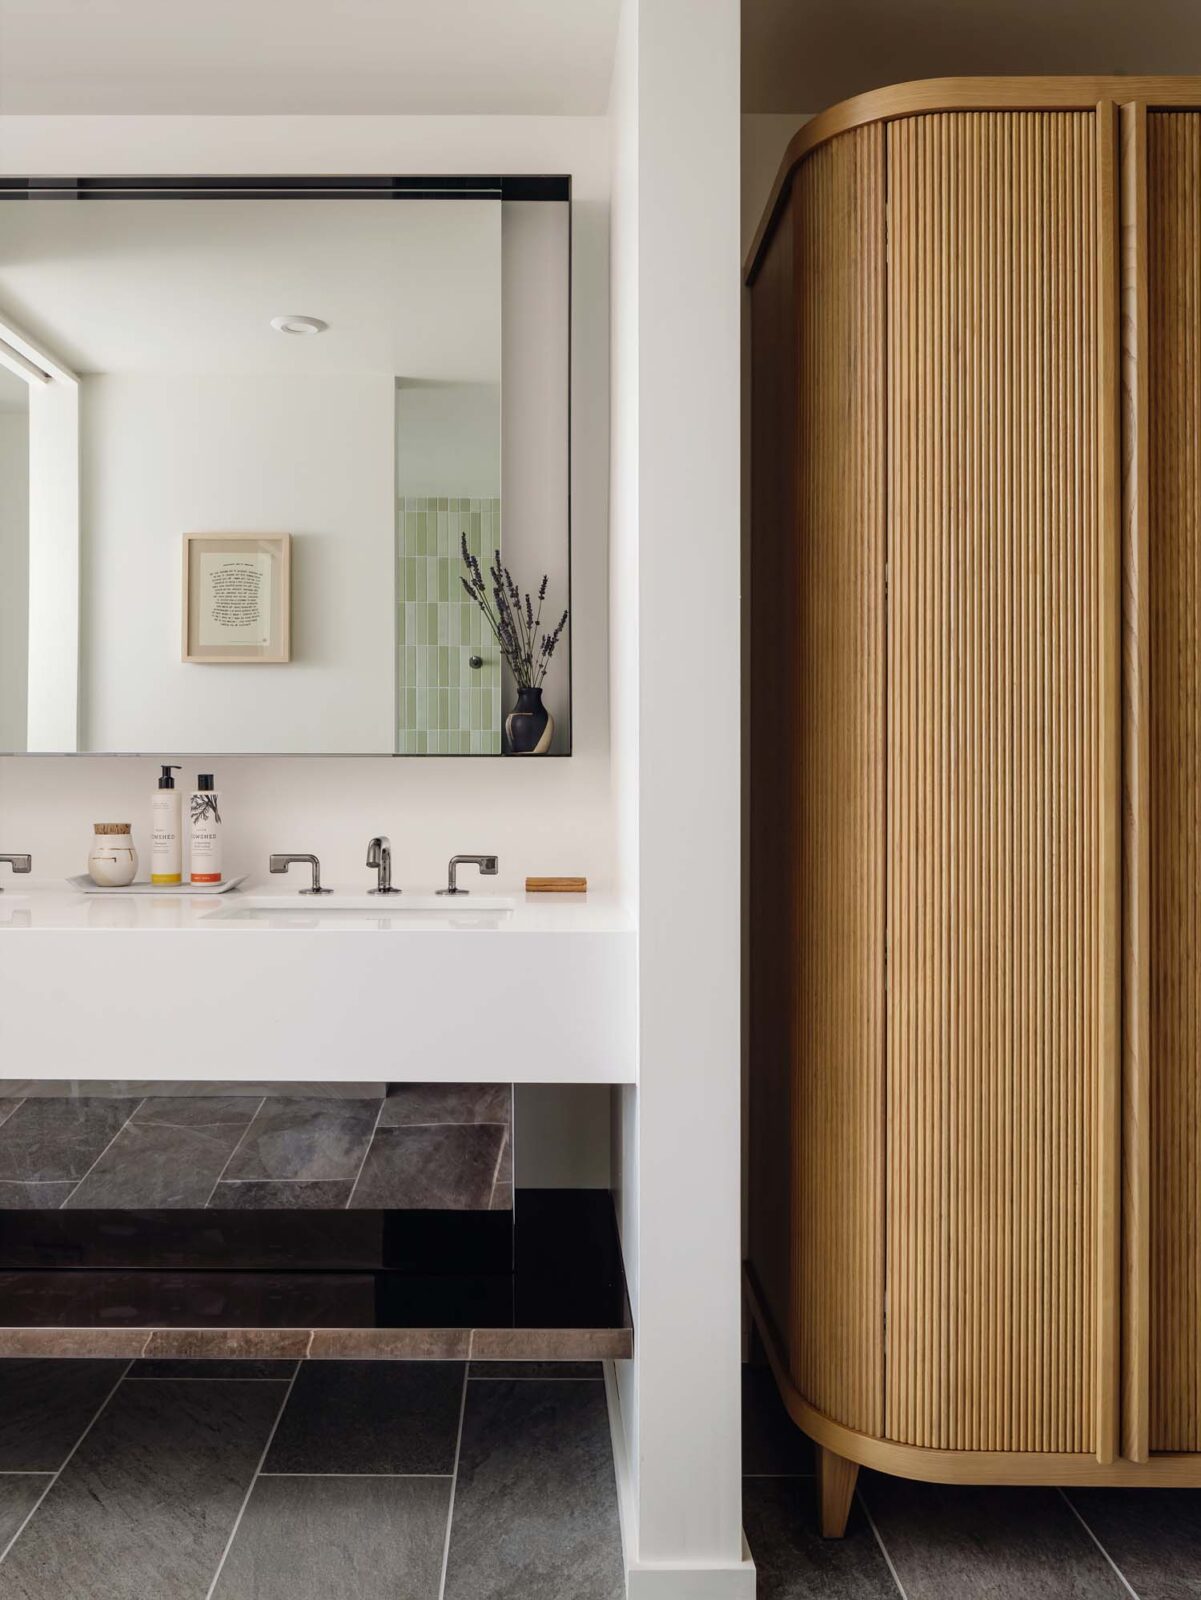 A bathroom sink with a wall-fitted mirror and a wooden touch armoire.